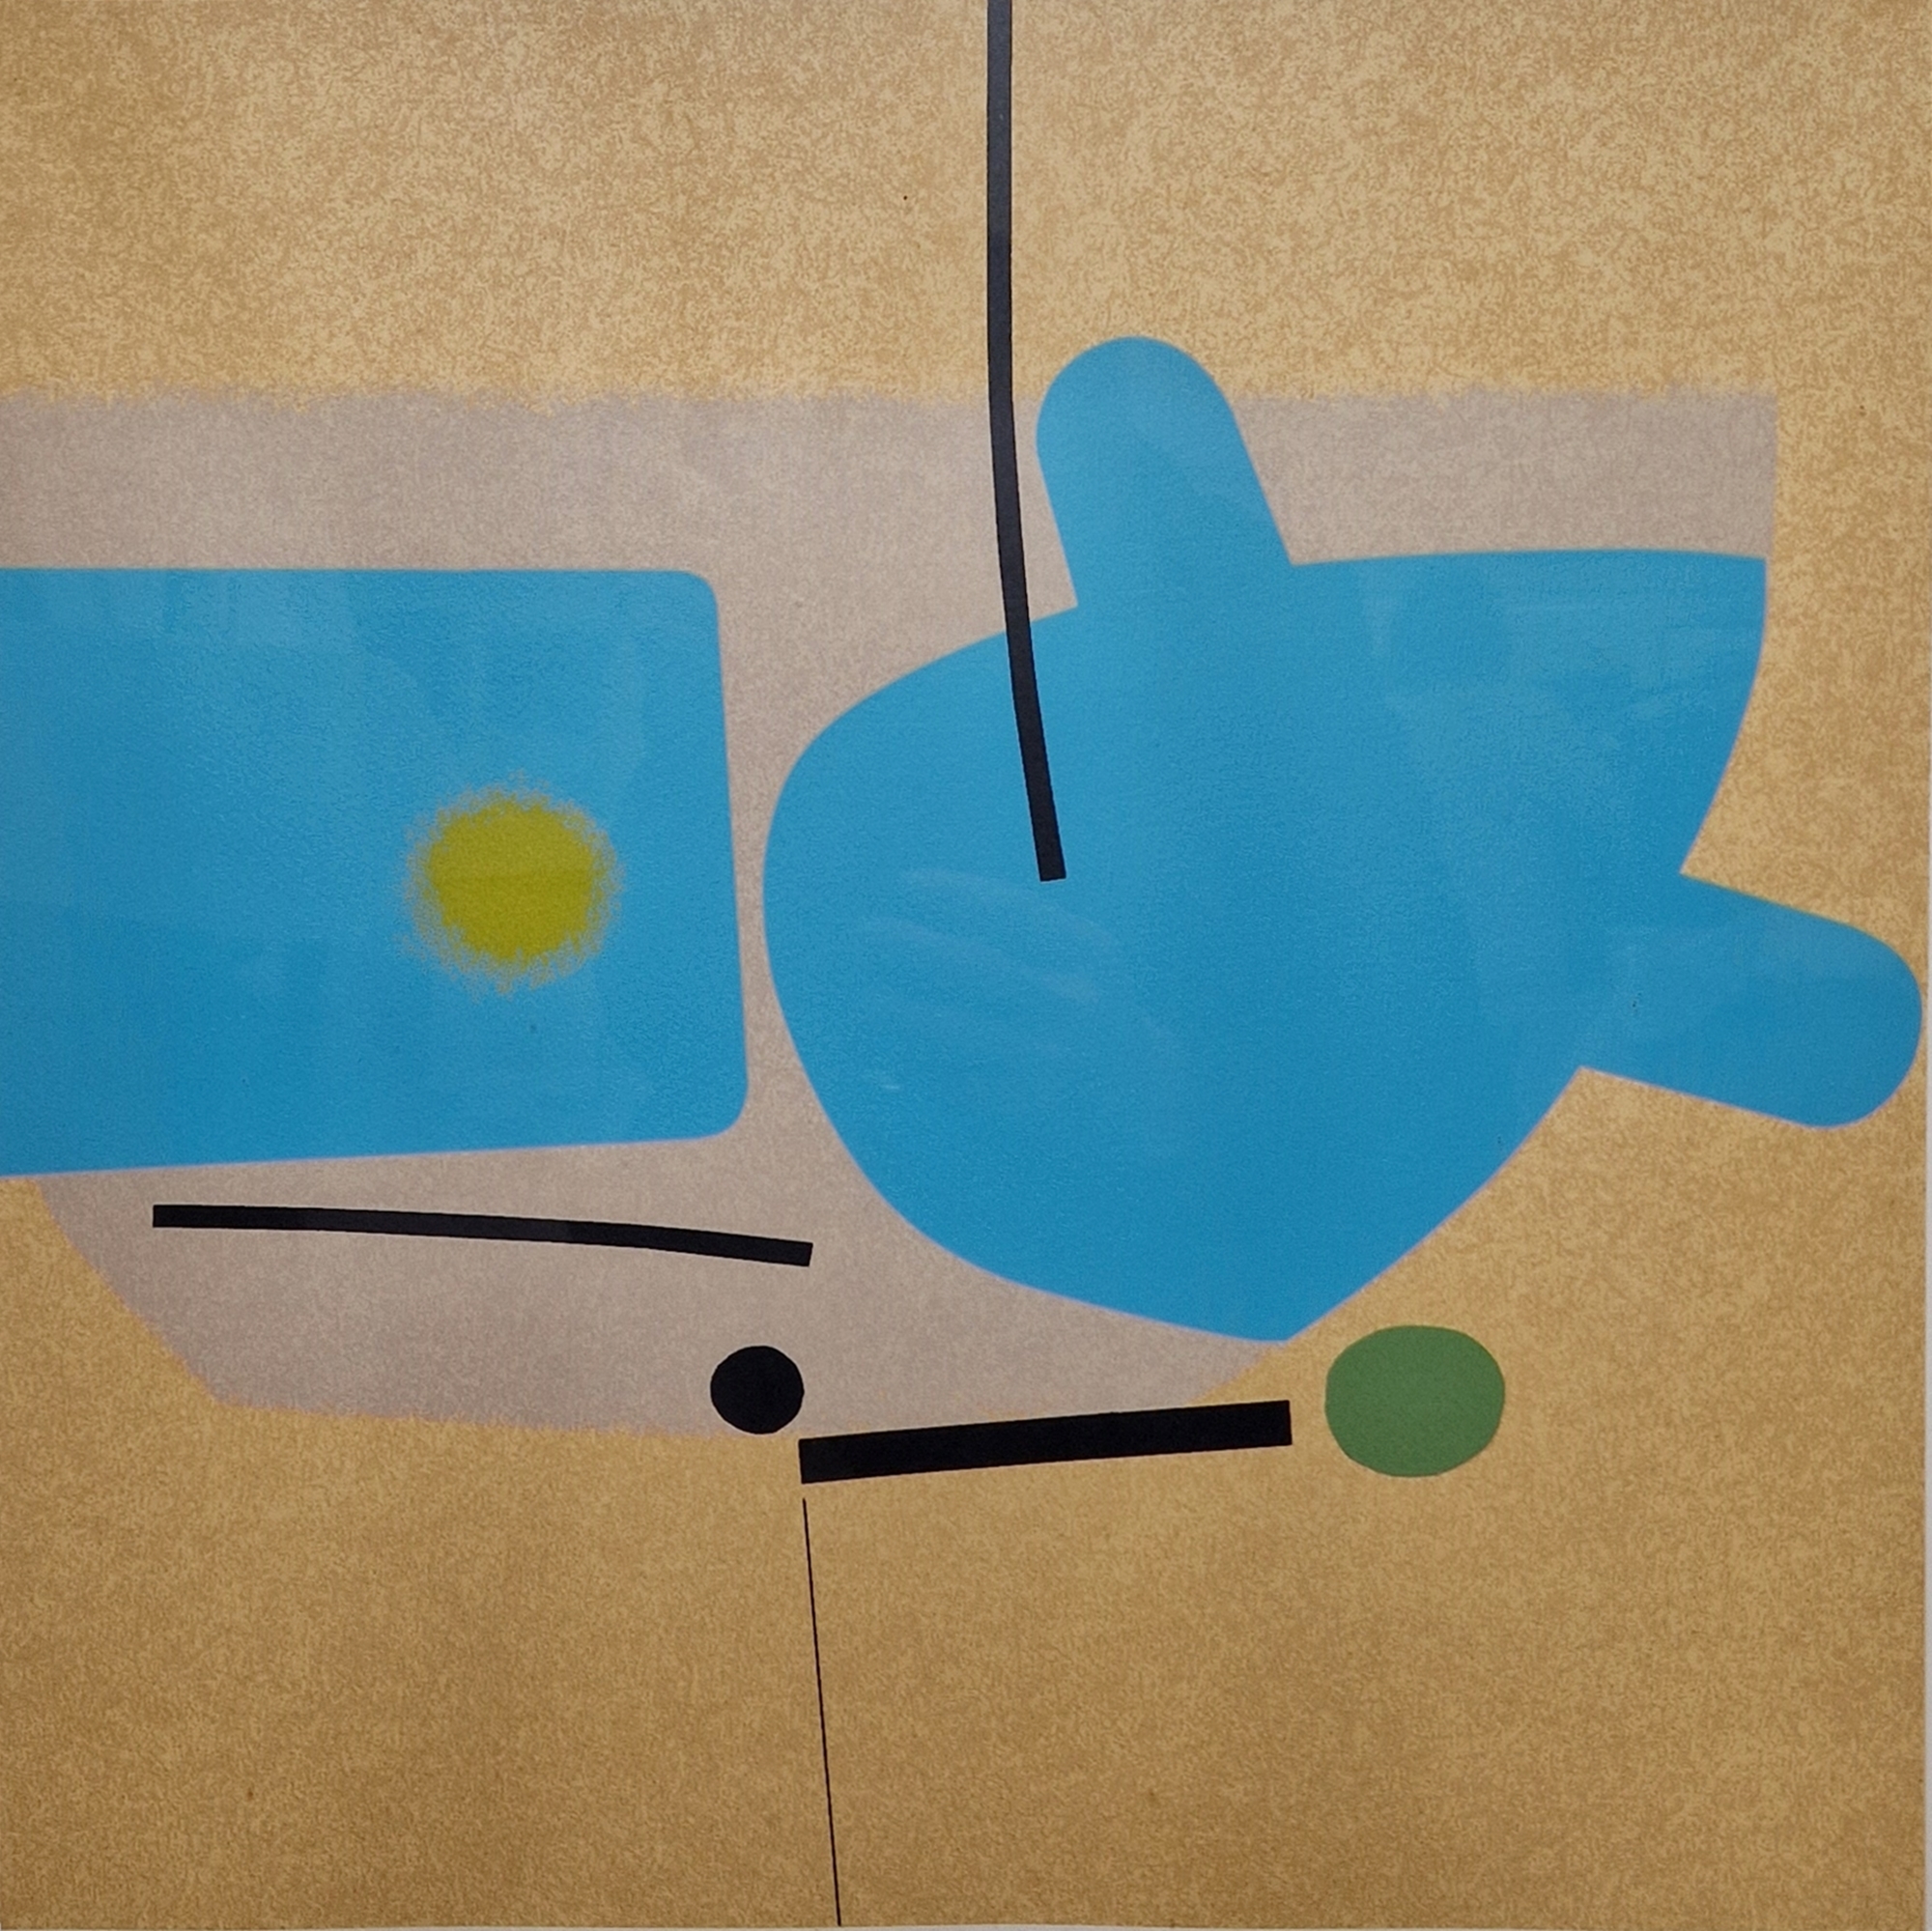 Victor Pasmore (1908-1998)  Two images  "Blue" 1984 Signed limited edition screenprint Edition 29/